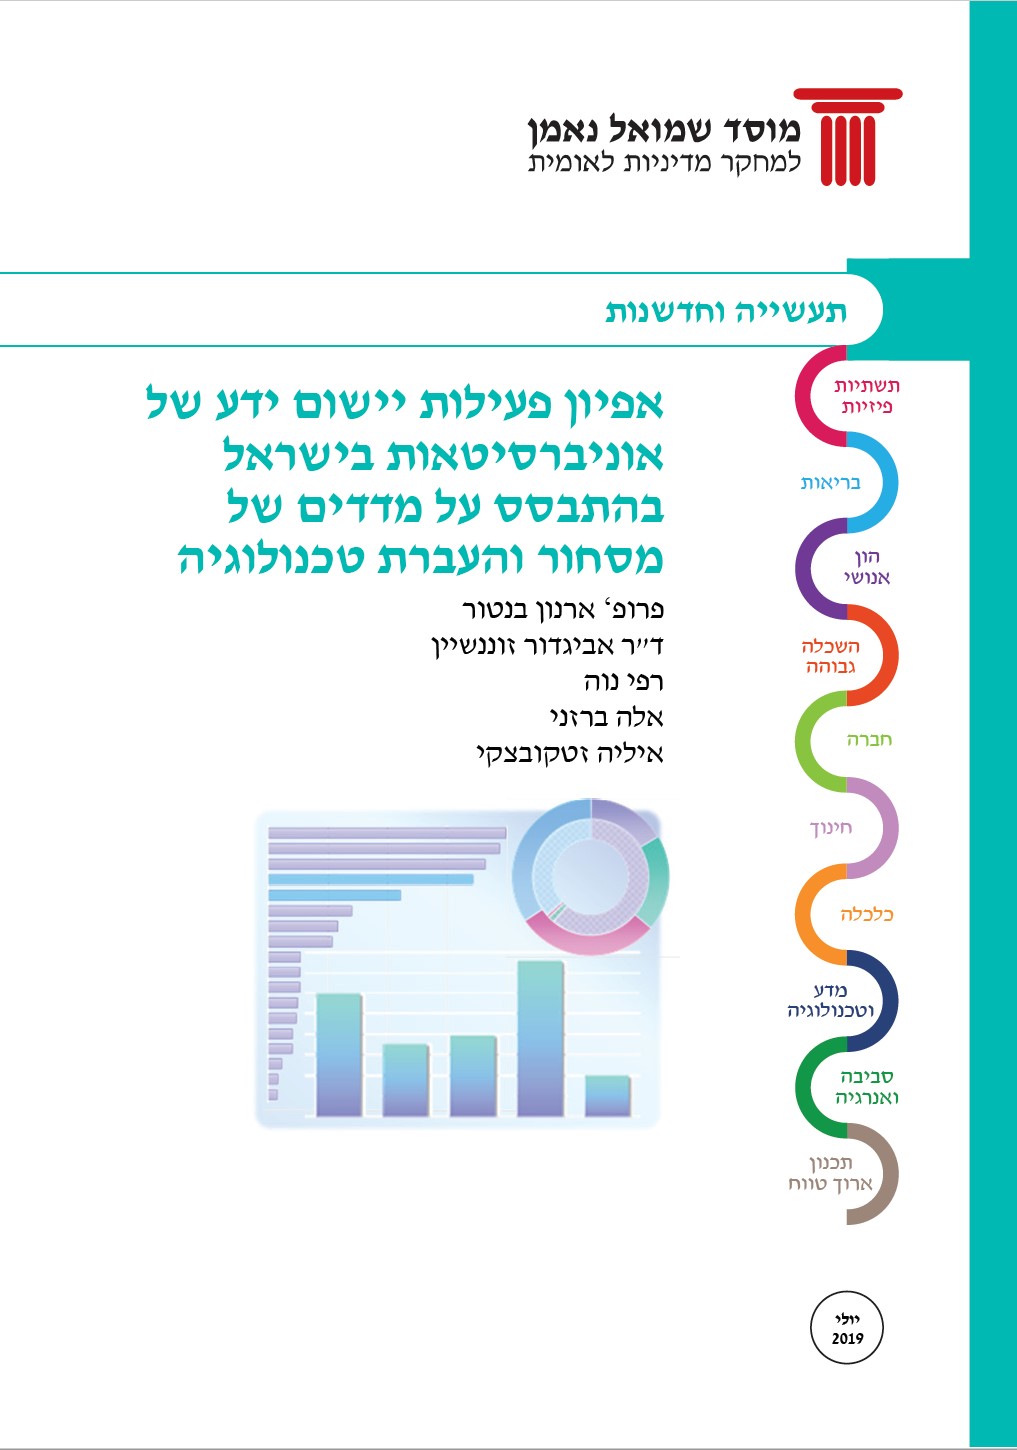 Characterization of knowledge transfer of Israeli universities based on indices of commercialization and technology transfer